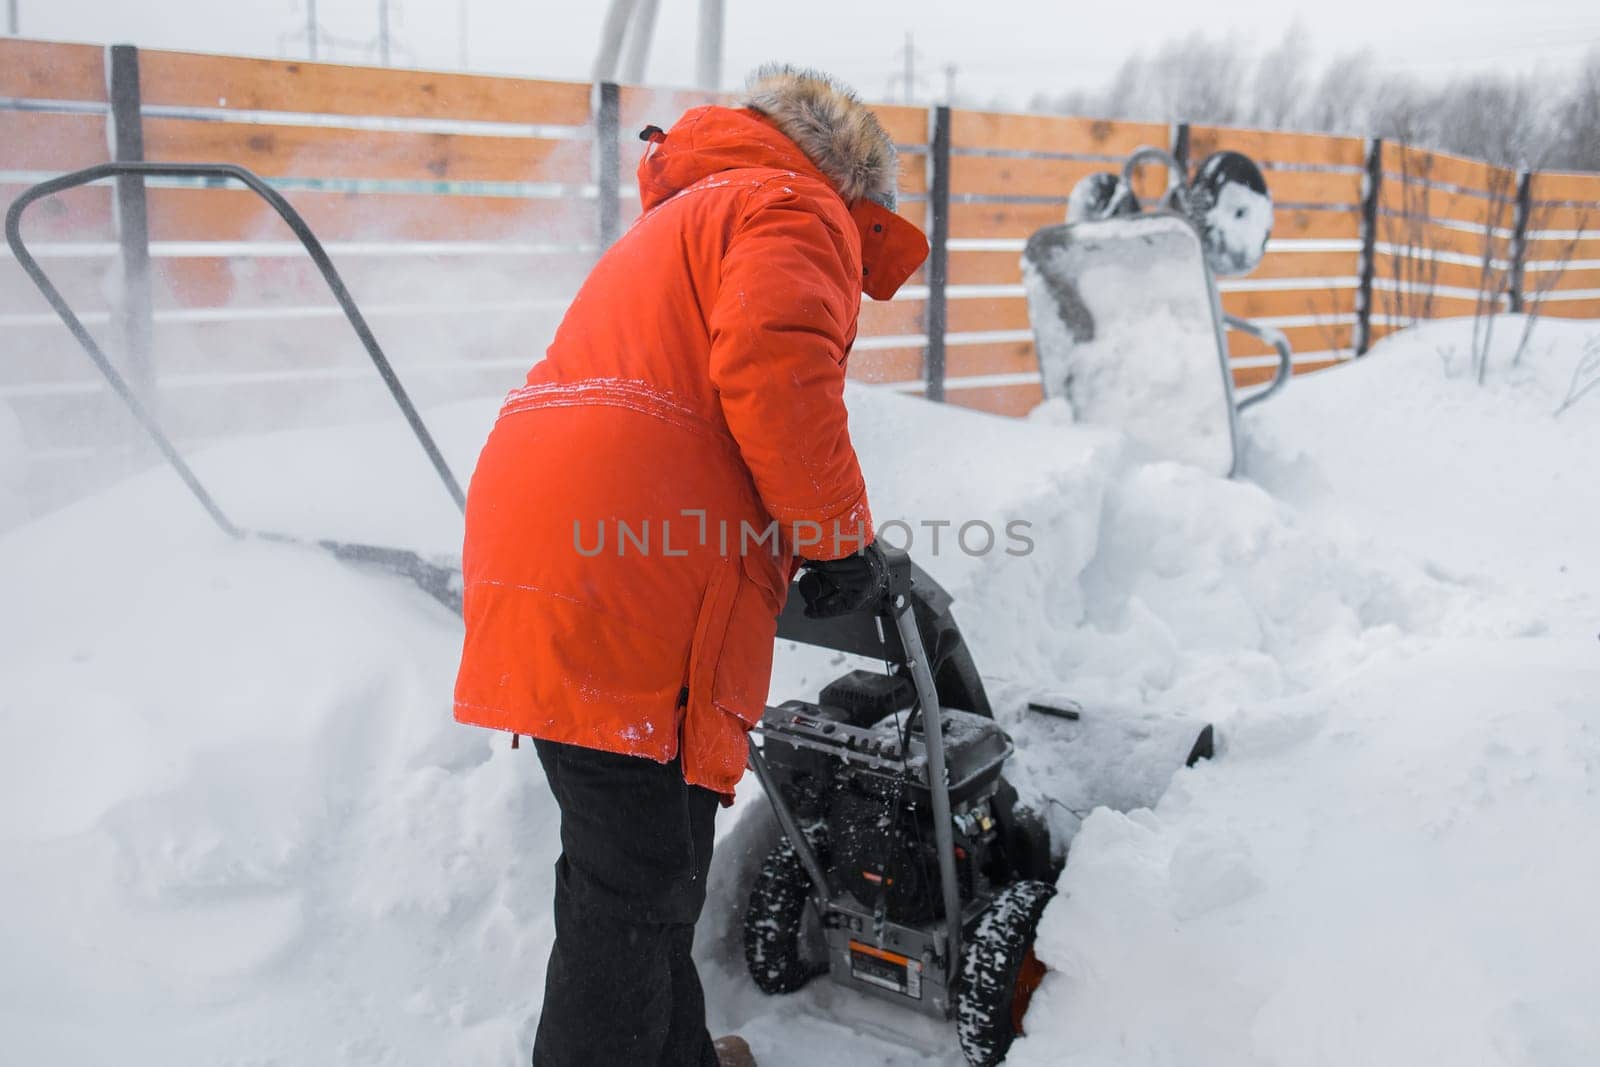 A man clear snow from backyard with snow blower. Winter season and snow blower equipment by Satura86